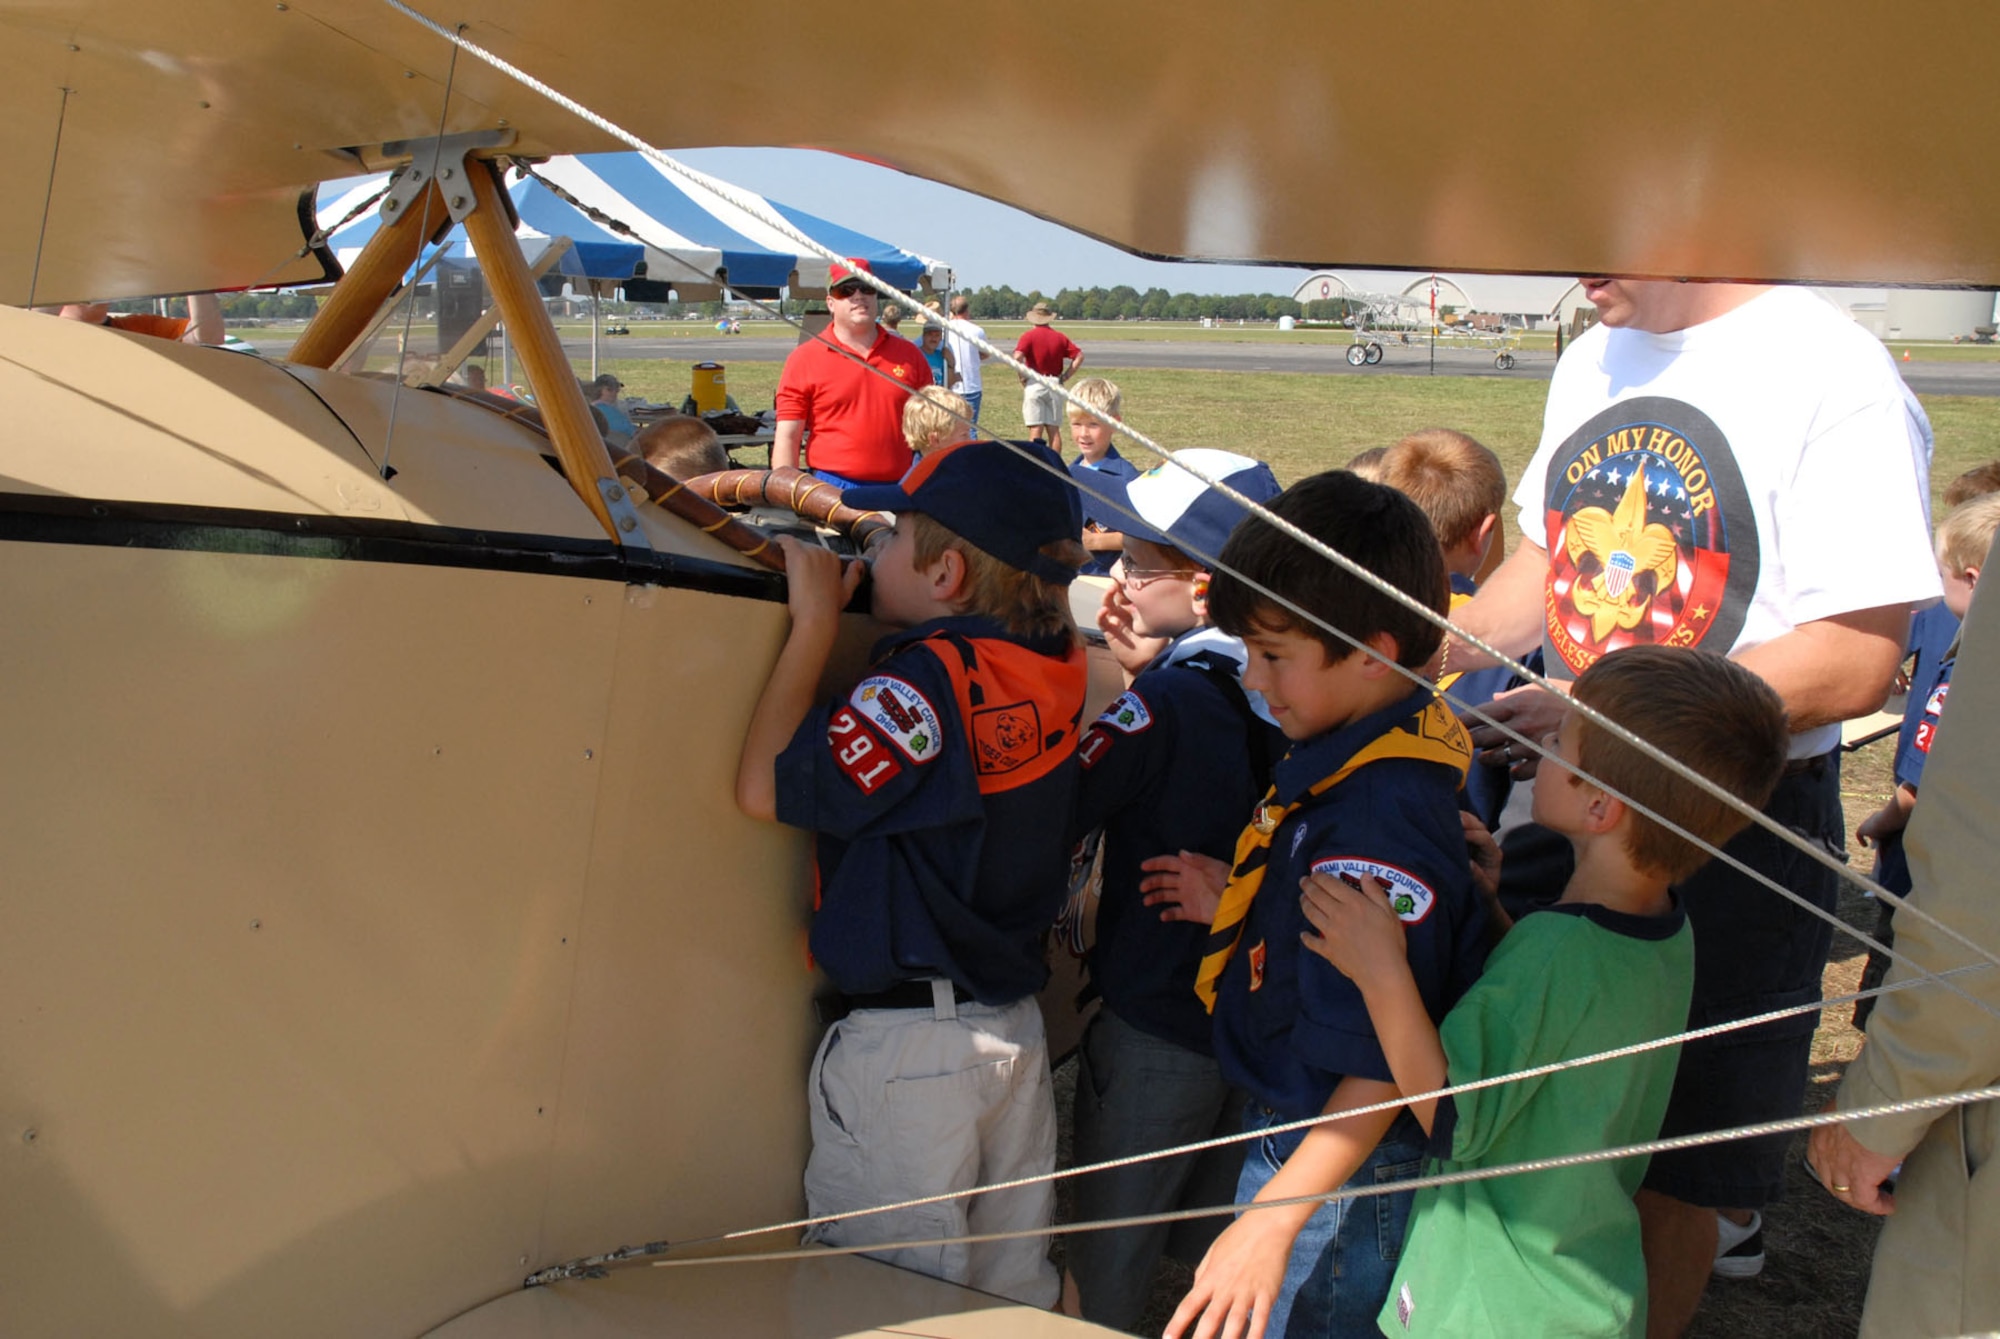 A group of Boy Scouts get a closer look inside one of the aircraft during the 2007 Dawn Patrol Rendezvous World War I Fly-In at the National Museum of the United States Air Force. (U.S. Air Force photo)